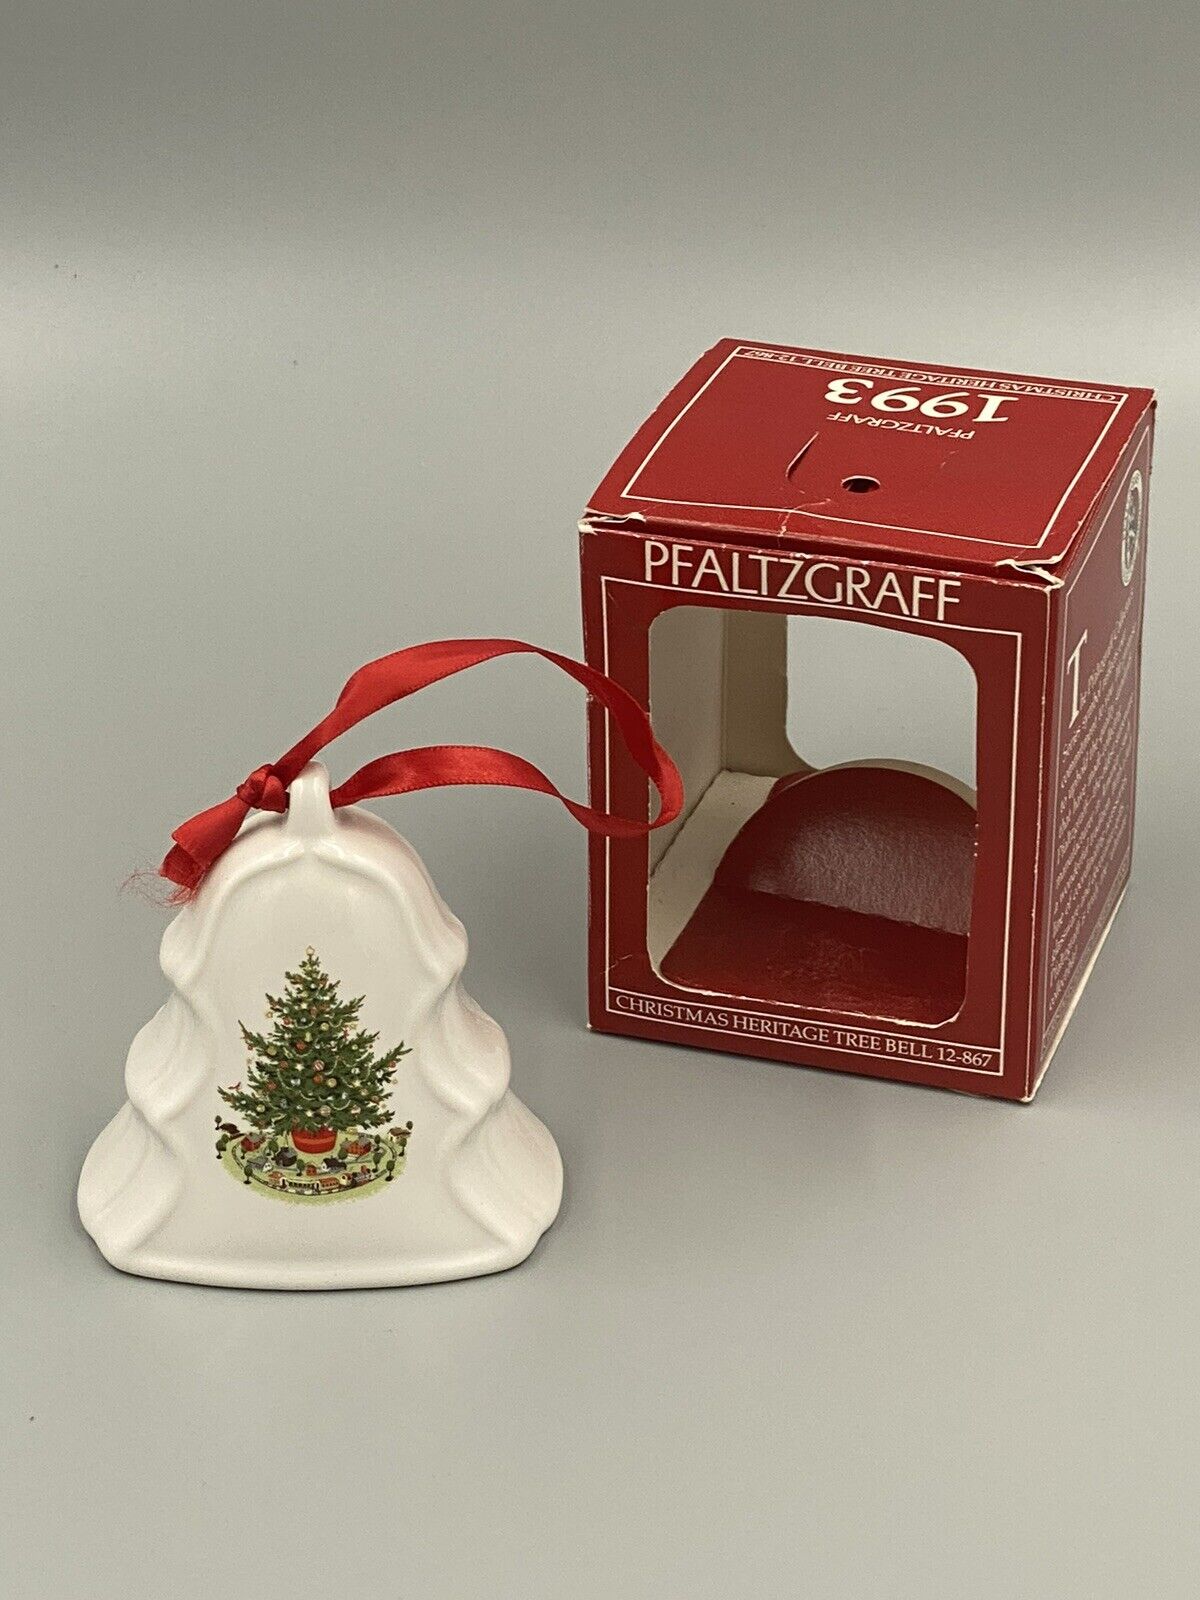 Vintage 1993 Pfaltzgraff Heritage Tree Bell Holiday Ornament Merry Christmas